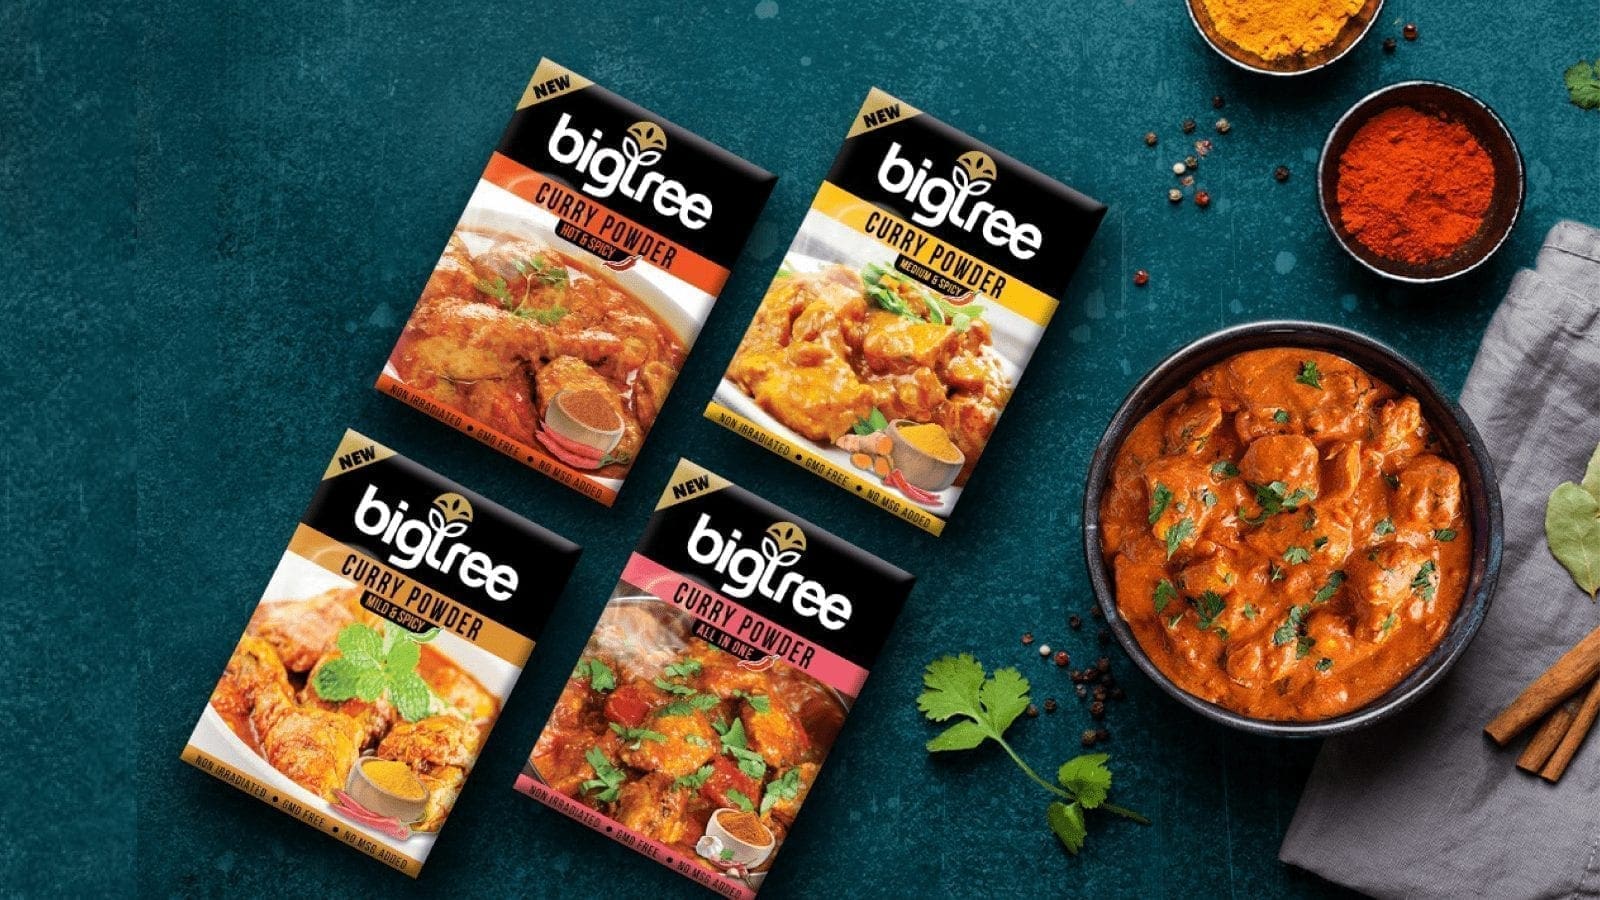 Bigtree Brands spices up Zambian cuisines with new curry powder